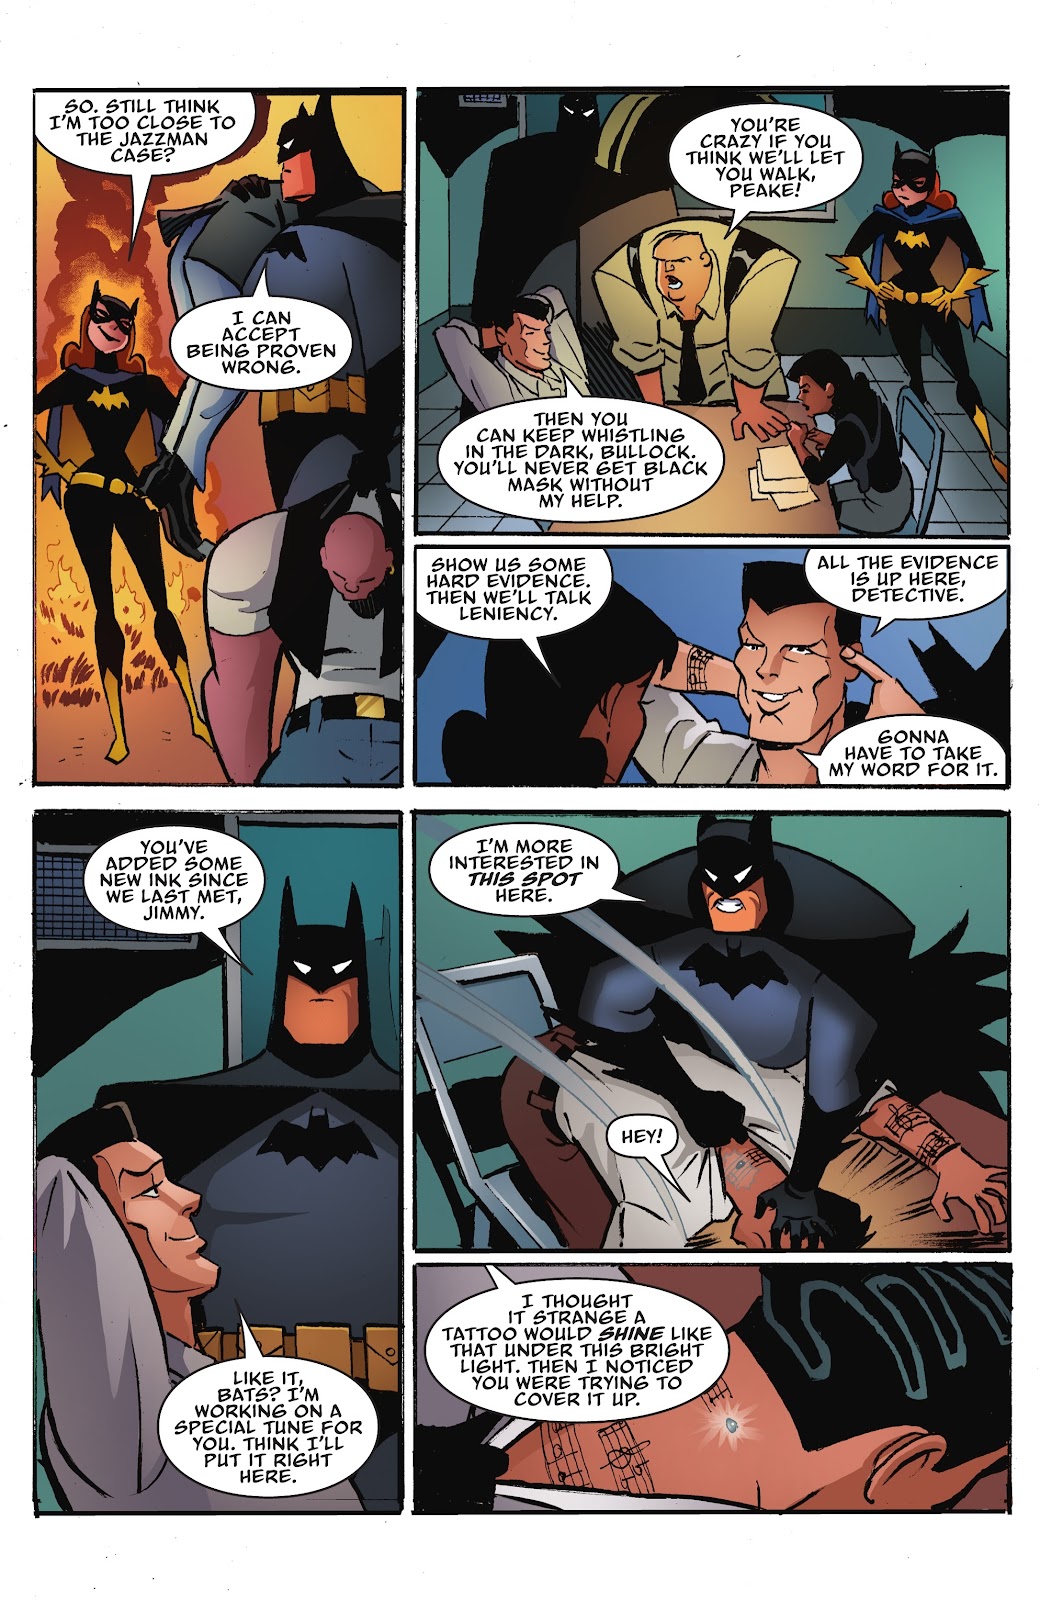 Batman: The Adventures Continue: Season Two issue 3 - Page 21